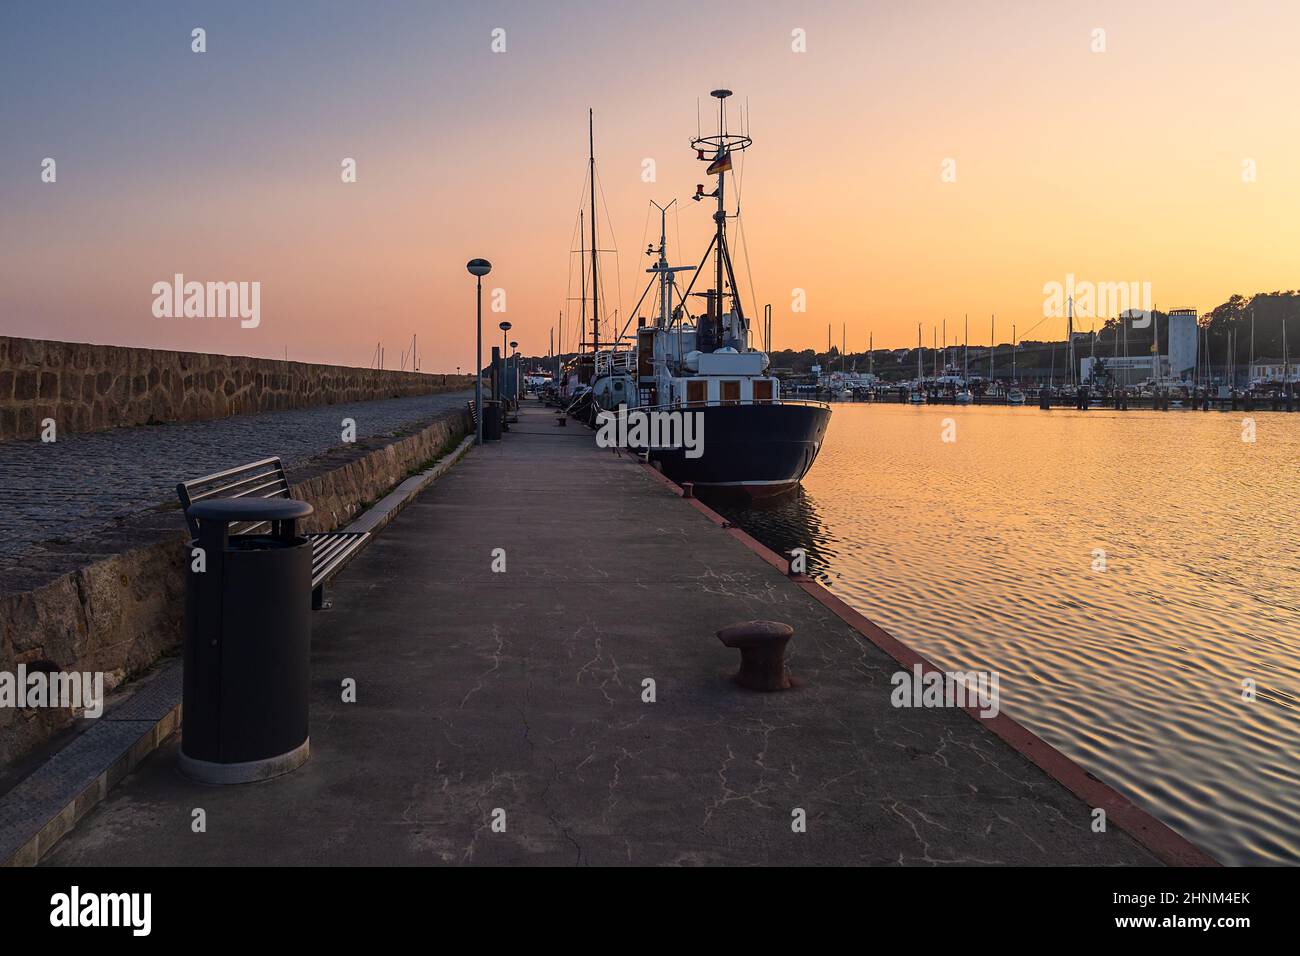 Ships in the evening in the port of Sassnitz on the island Ruegen, Germany Stock Photo